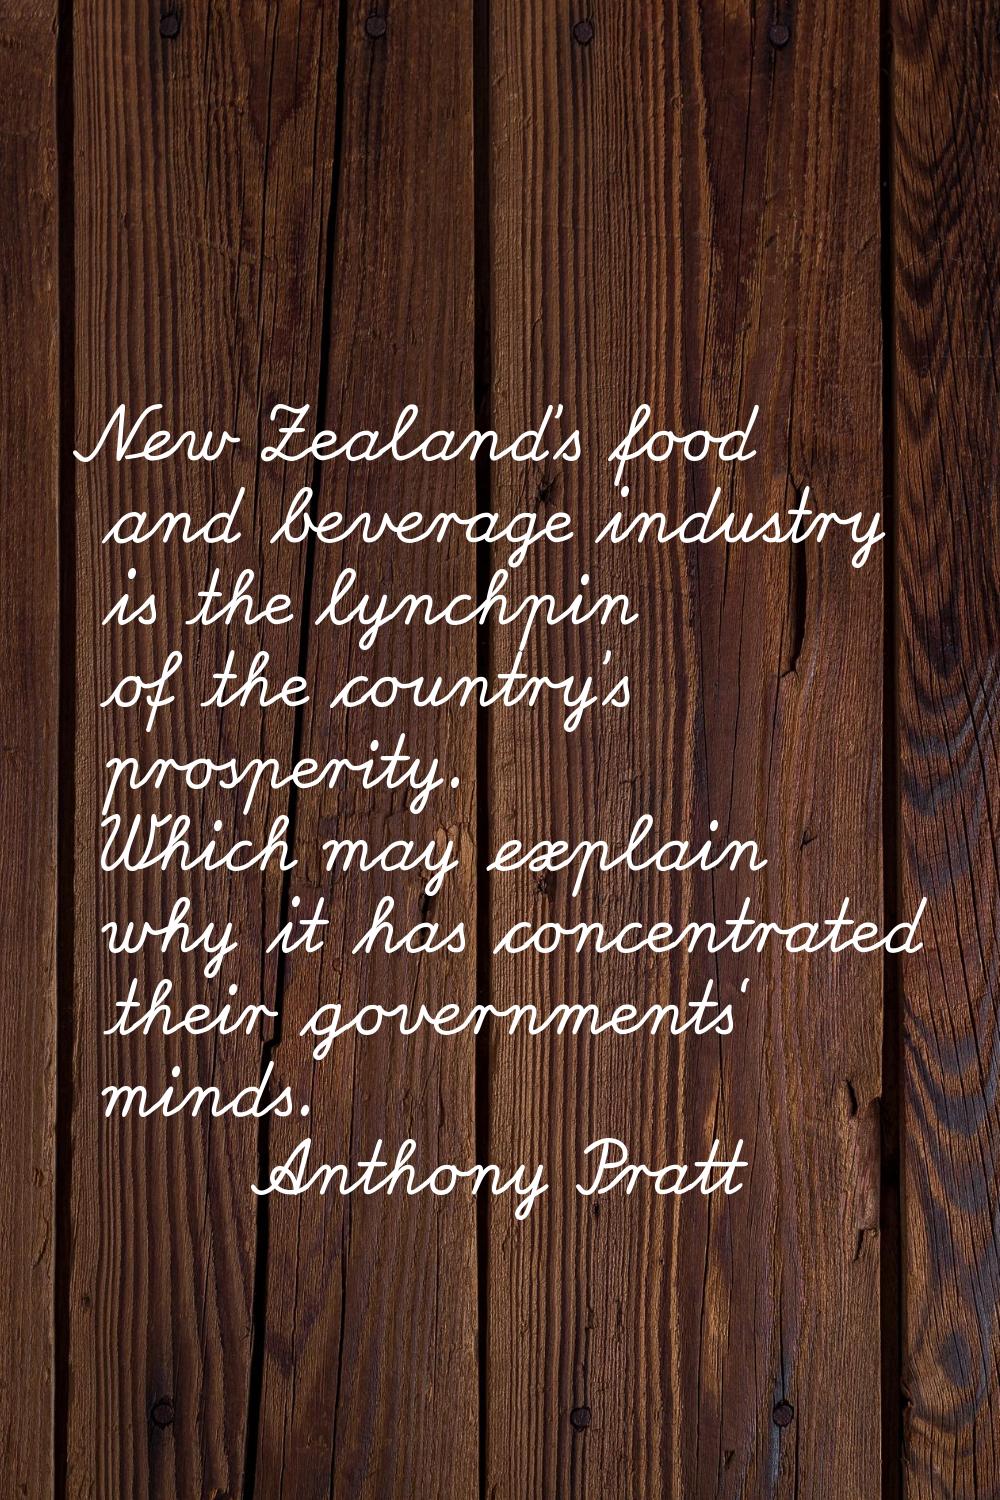 New Zealand's food and beverage industry is the lynchpin of the country's prosperity. Which may exp